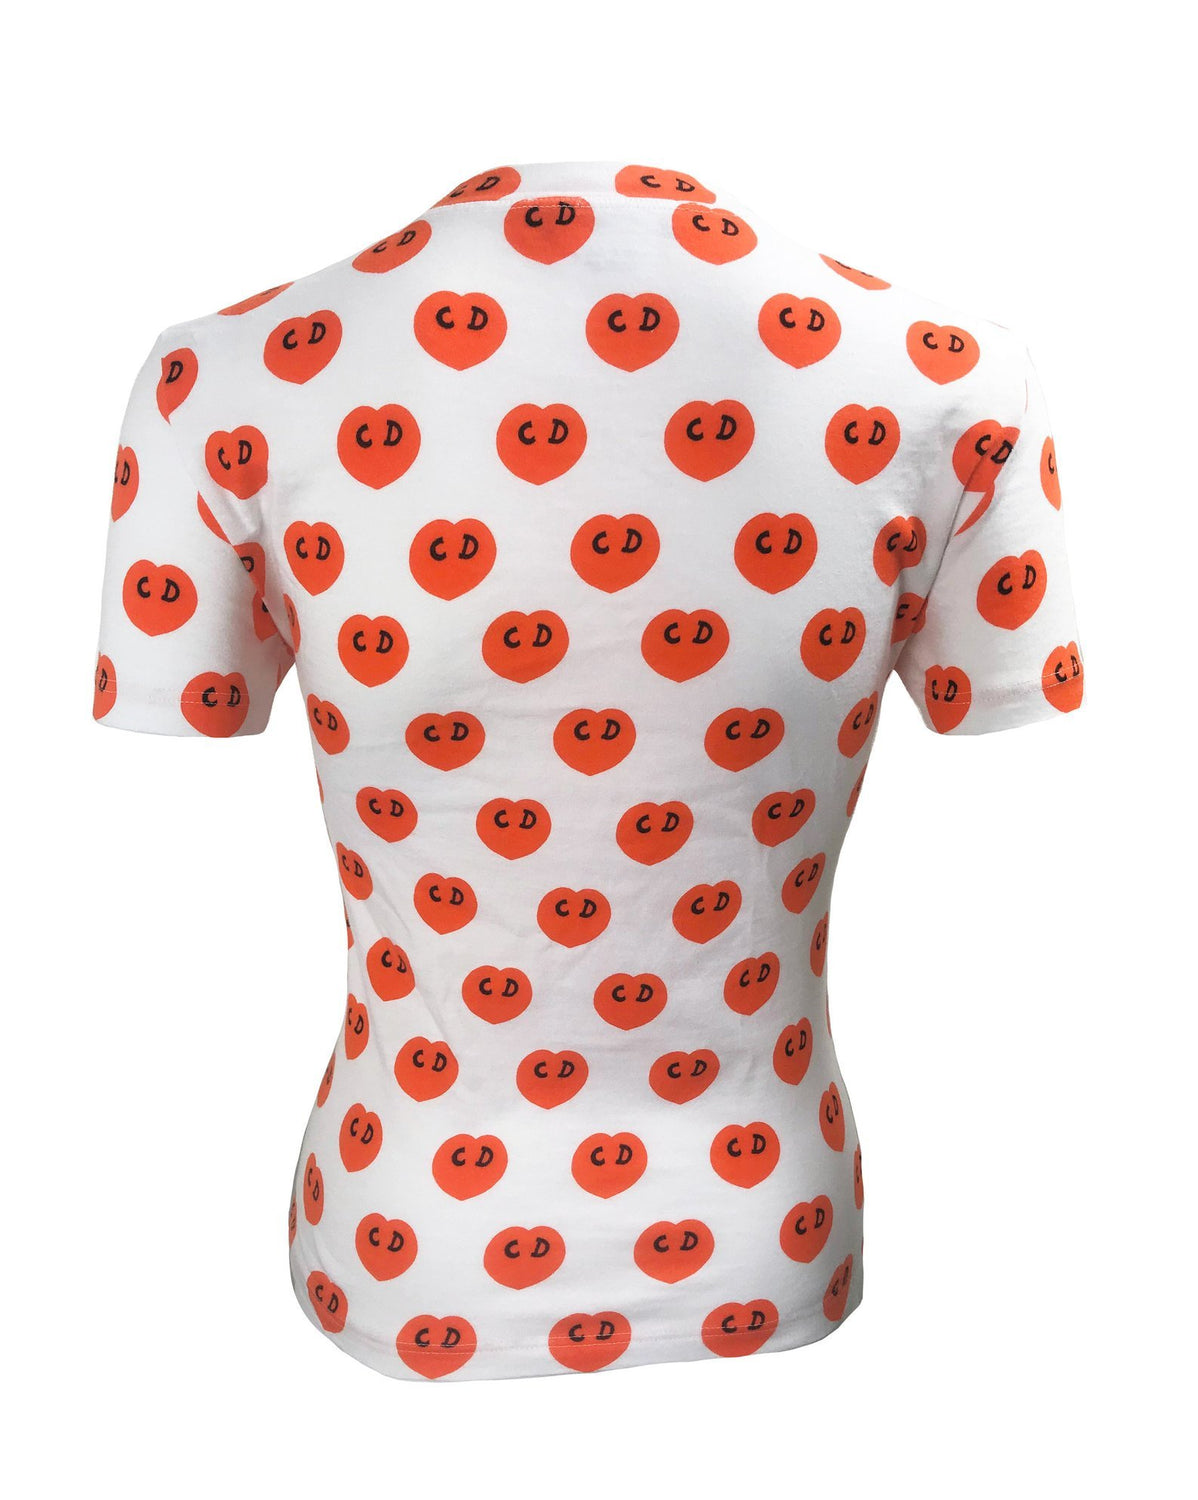 Fruit Vintage Christian Dior CD heart print Logo t-shirt by John Galliano. Features a classic t-shirt cut and graphic pattern logo monogram print.